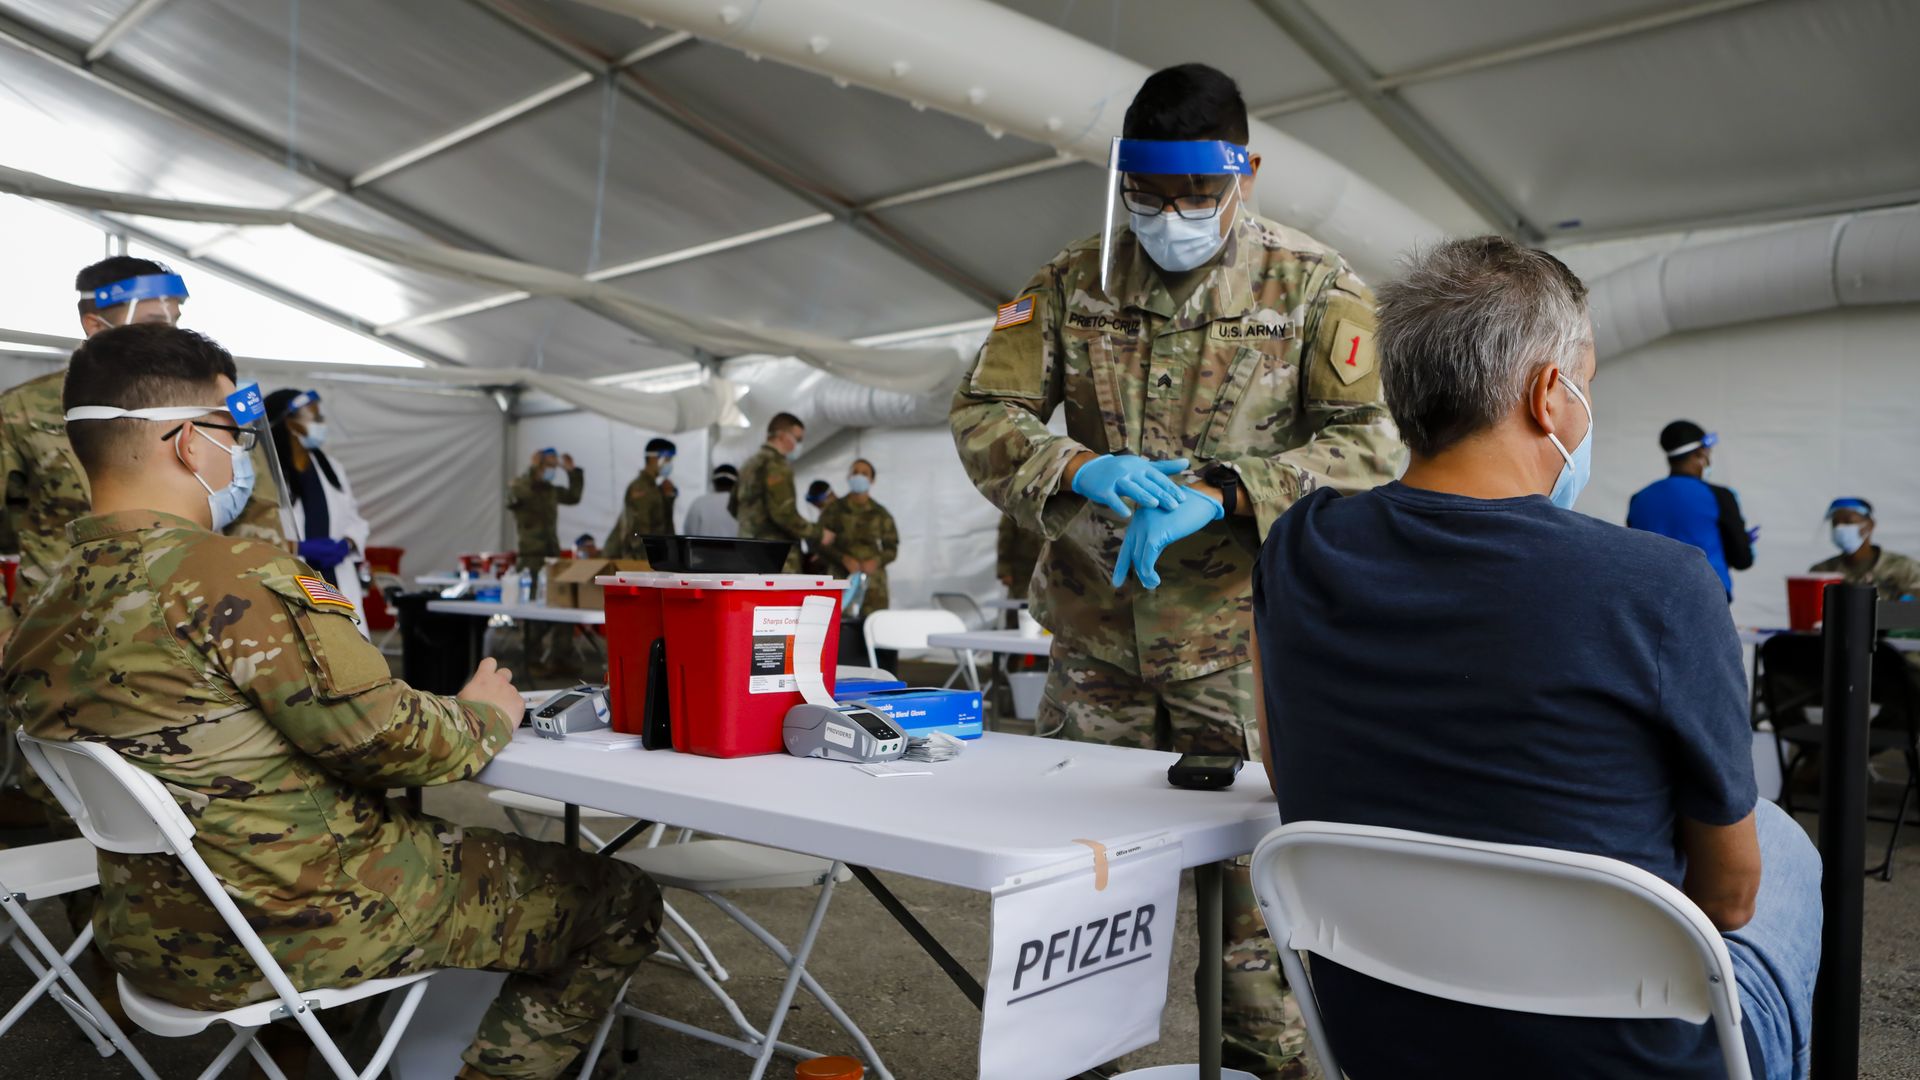  U.S. Army soldier prepares to administer a dose of the Pfizer-BioNTech Covid-19 vaccine.